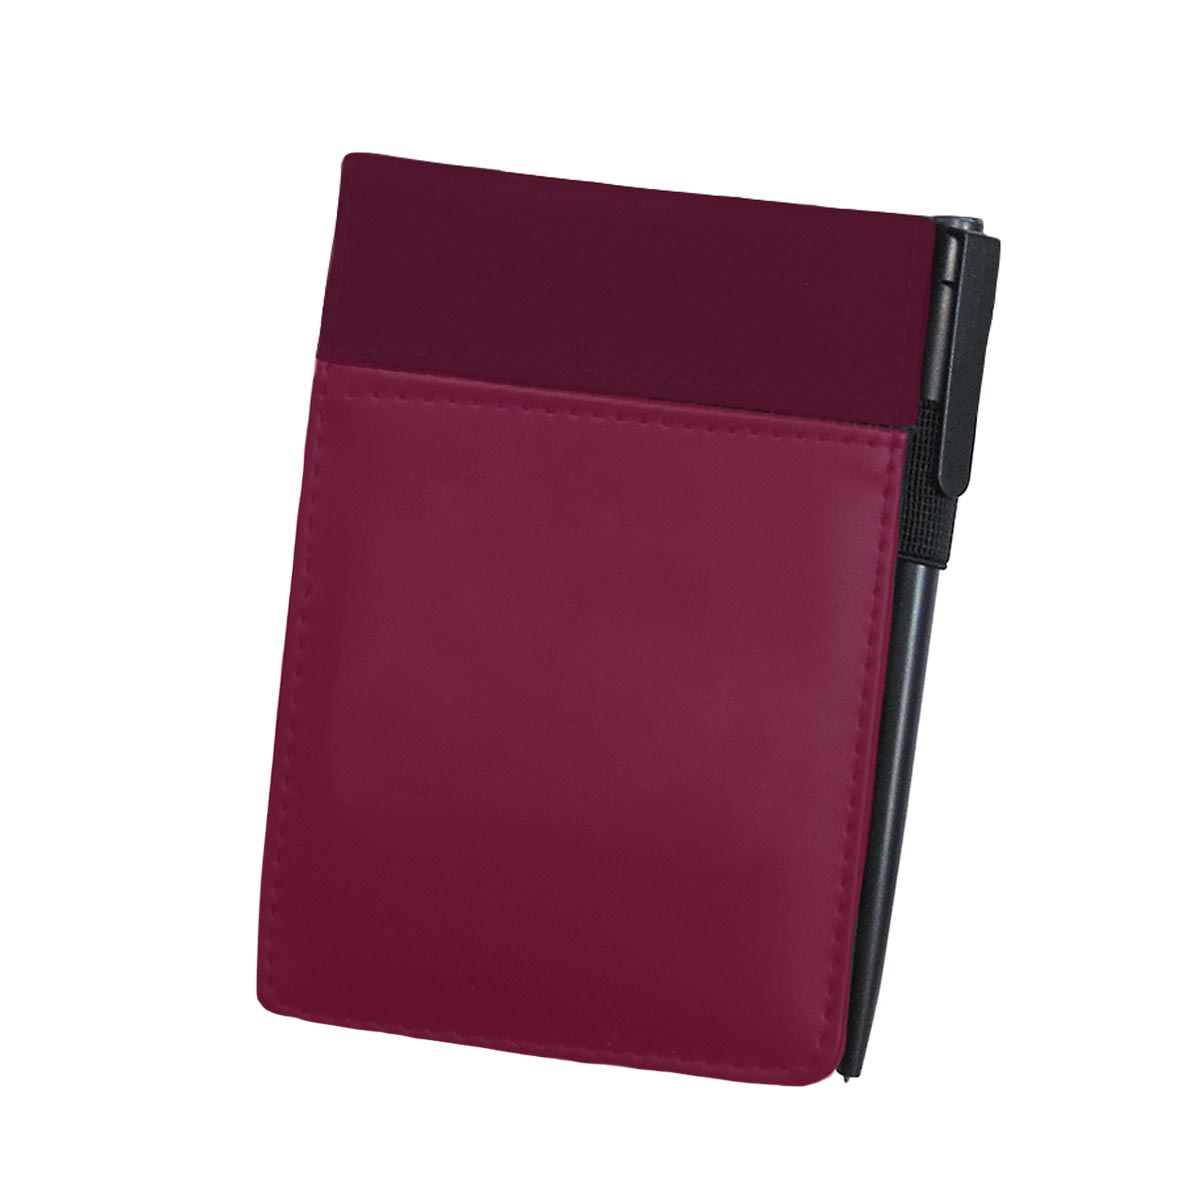 Burgundy Deluxe Note Jotter with Pen